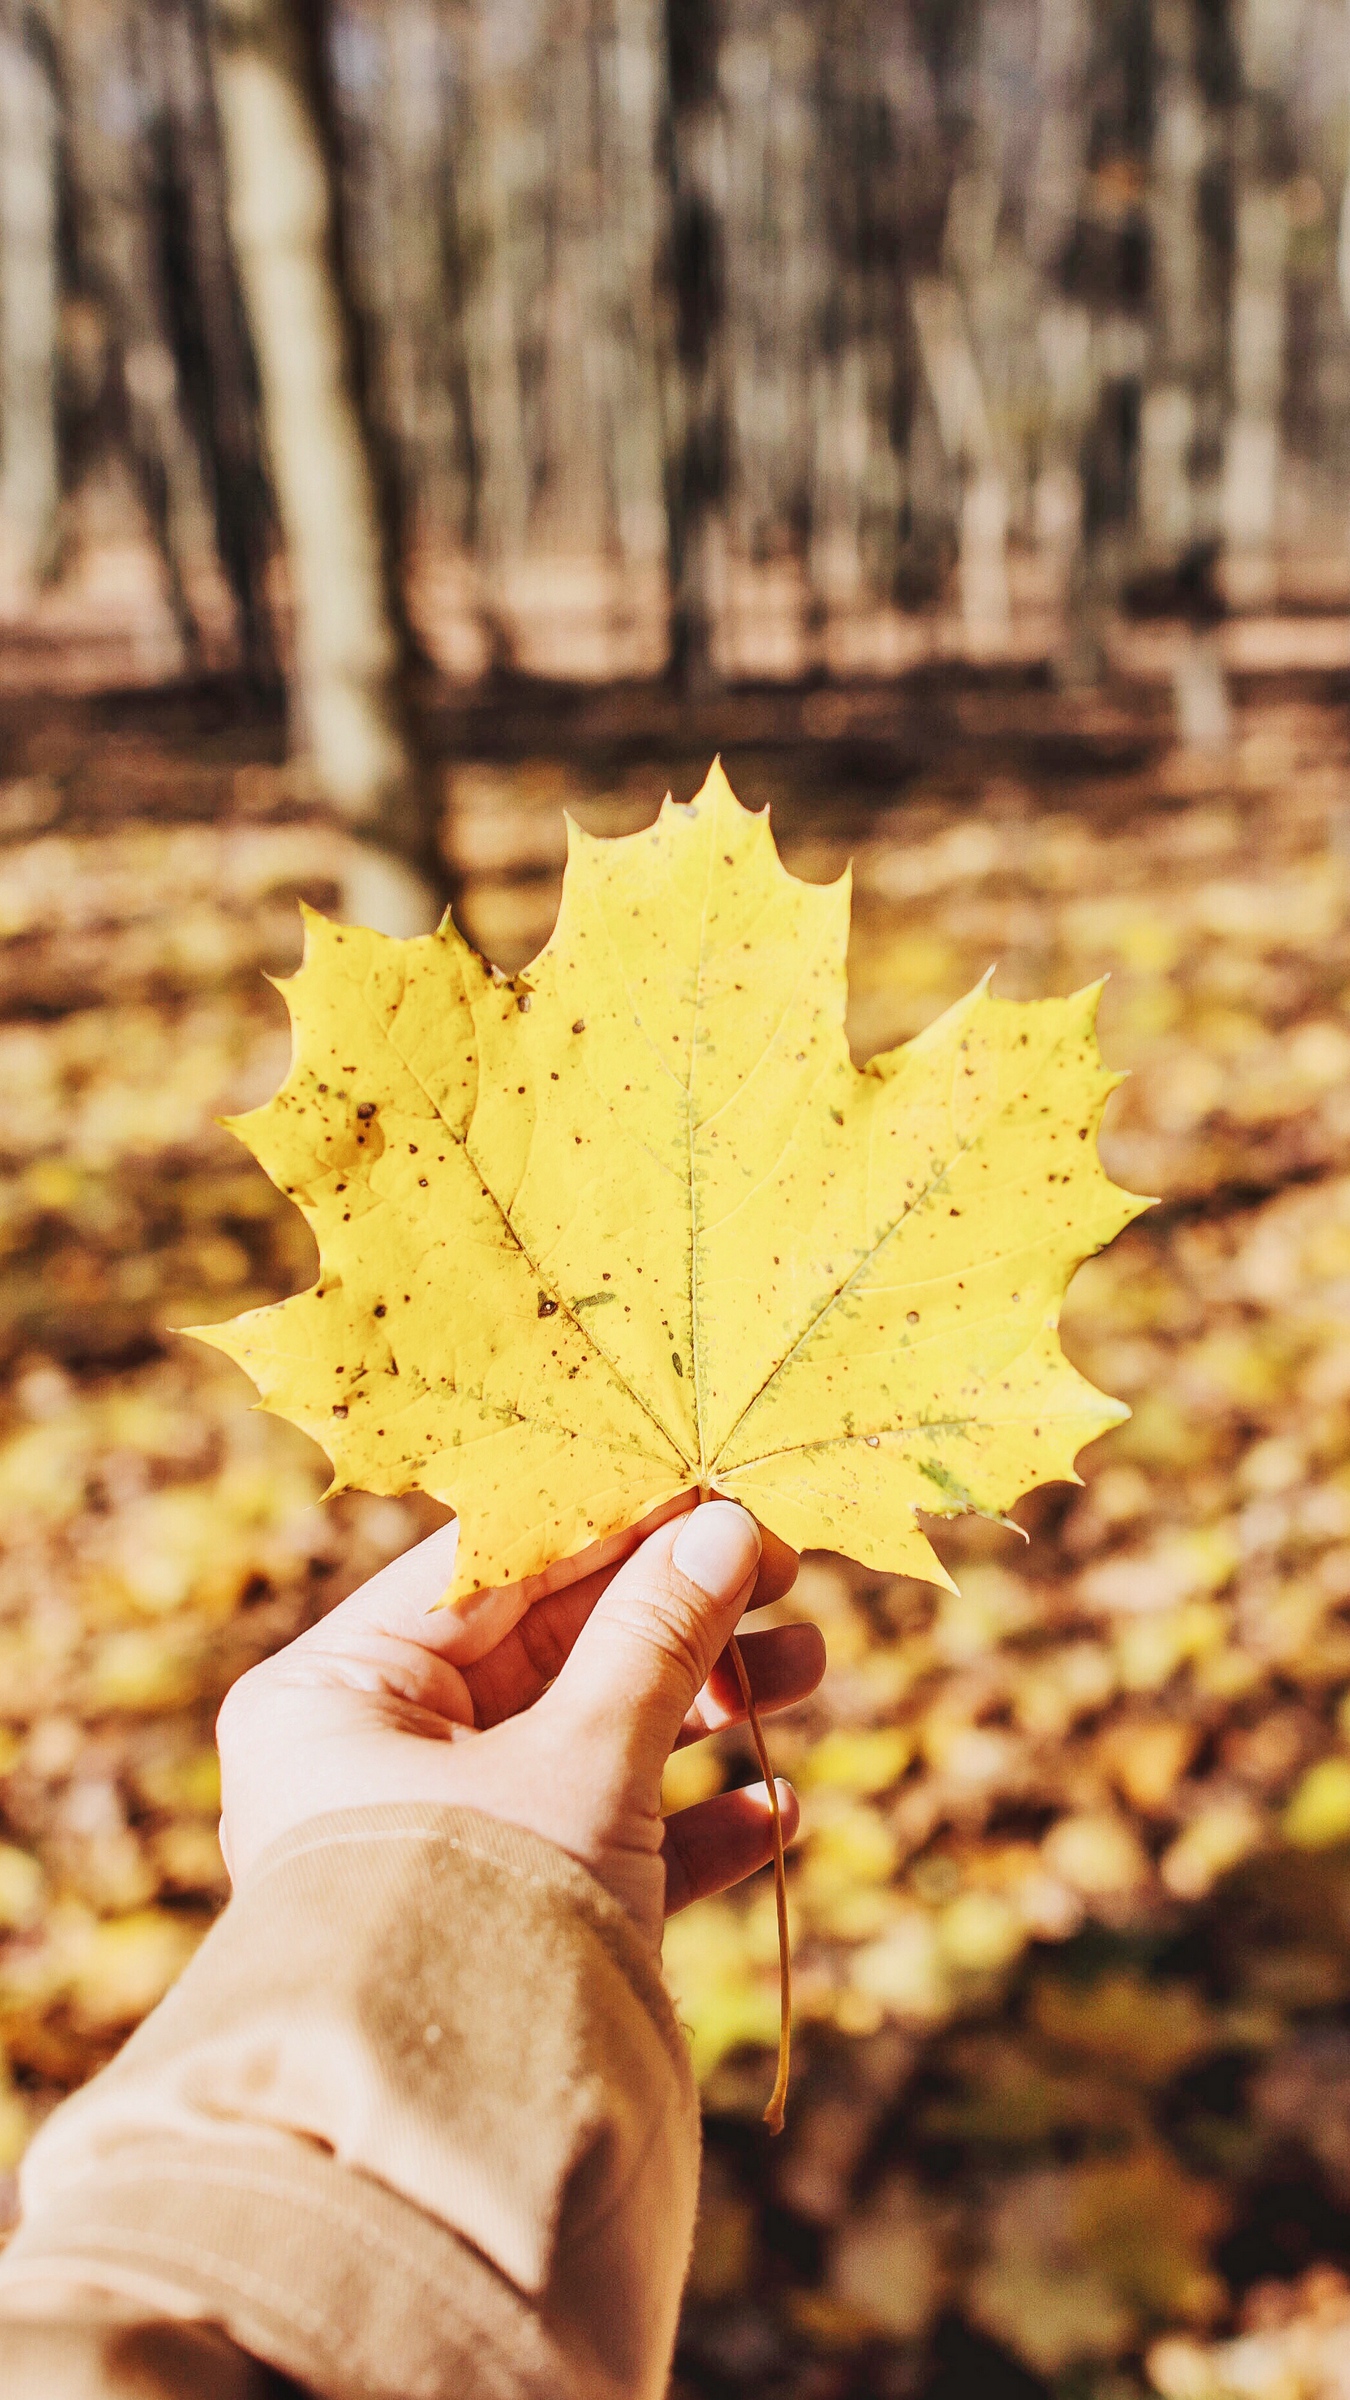 Wallpaper Leaf, Maple, Hand, Autumn, Fallen, Yellow - Leaf With Hand Yellow - HD Wallpaper 